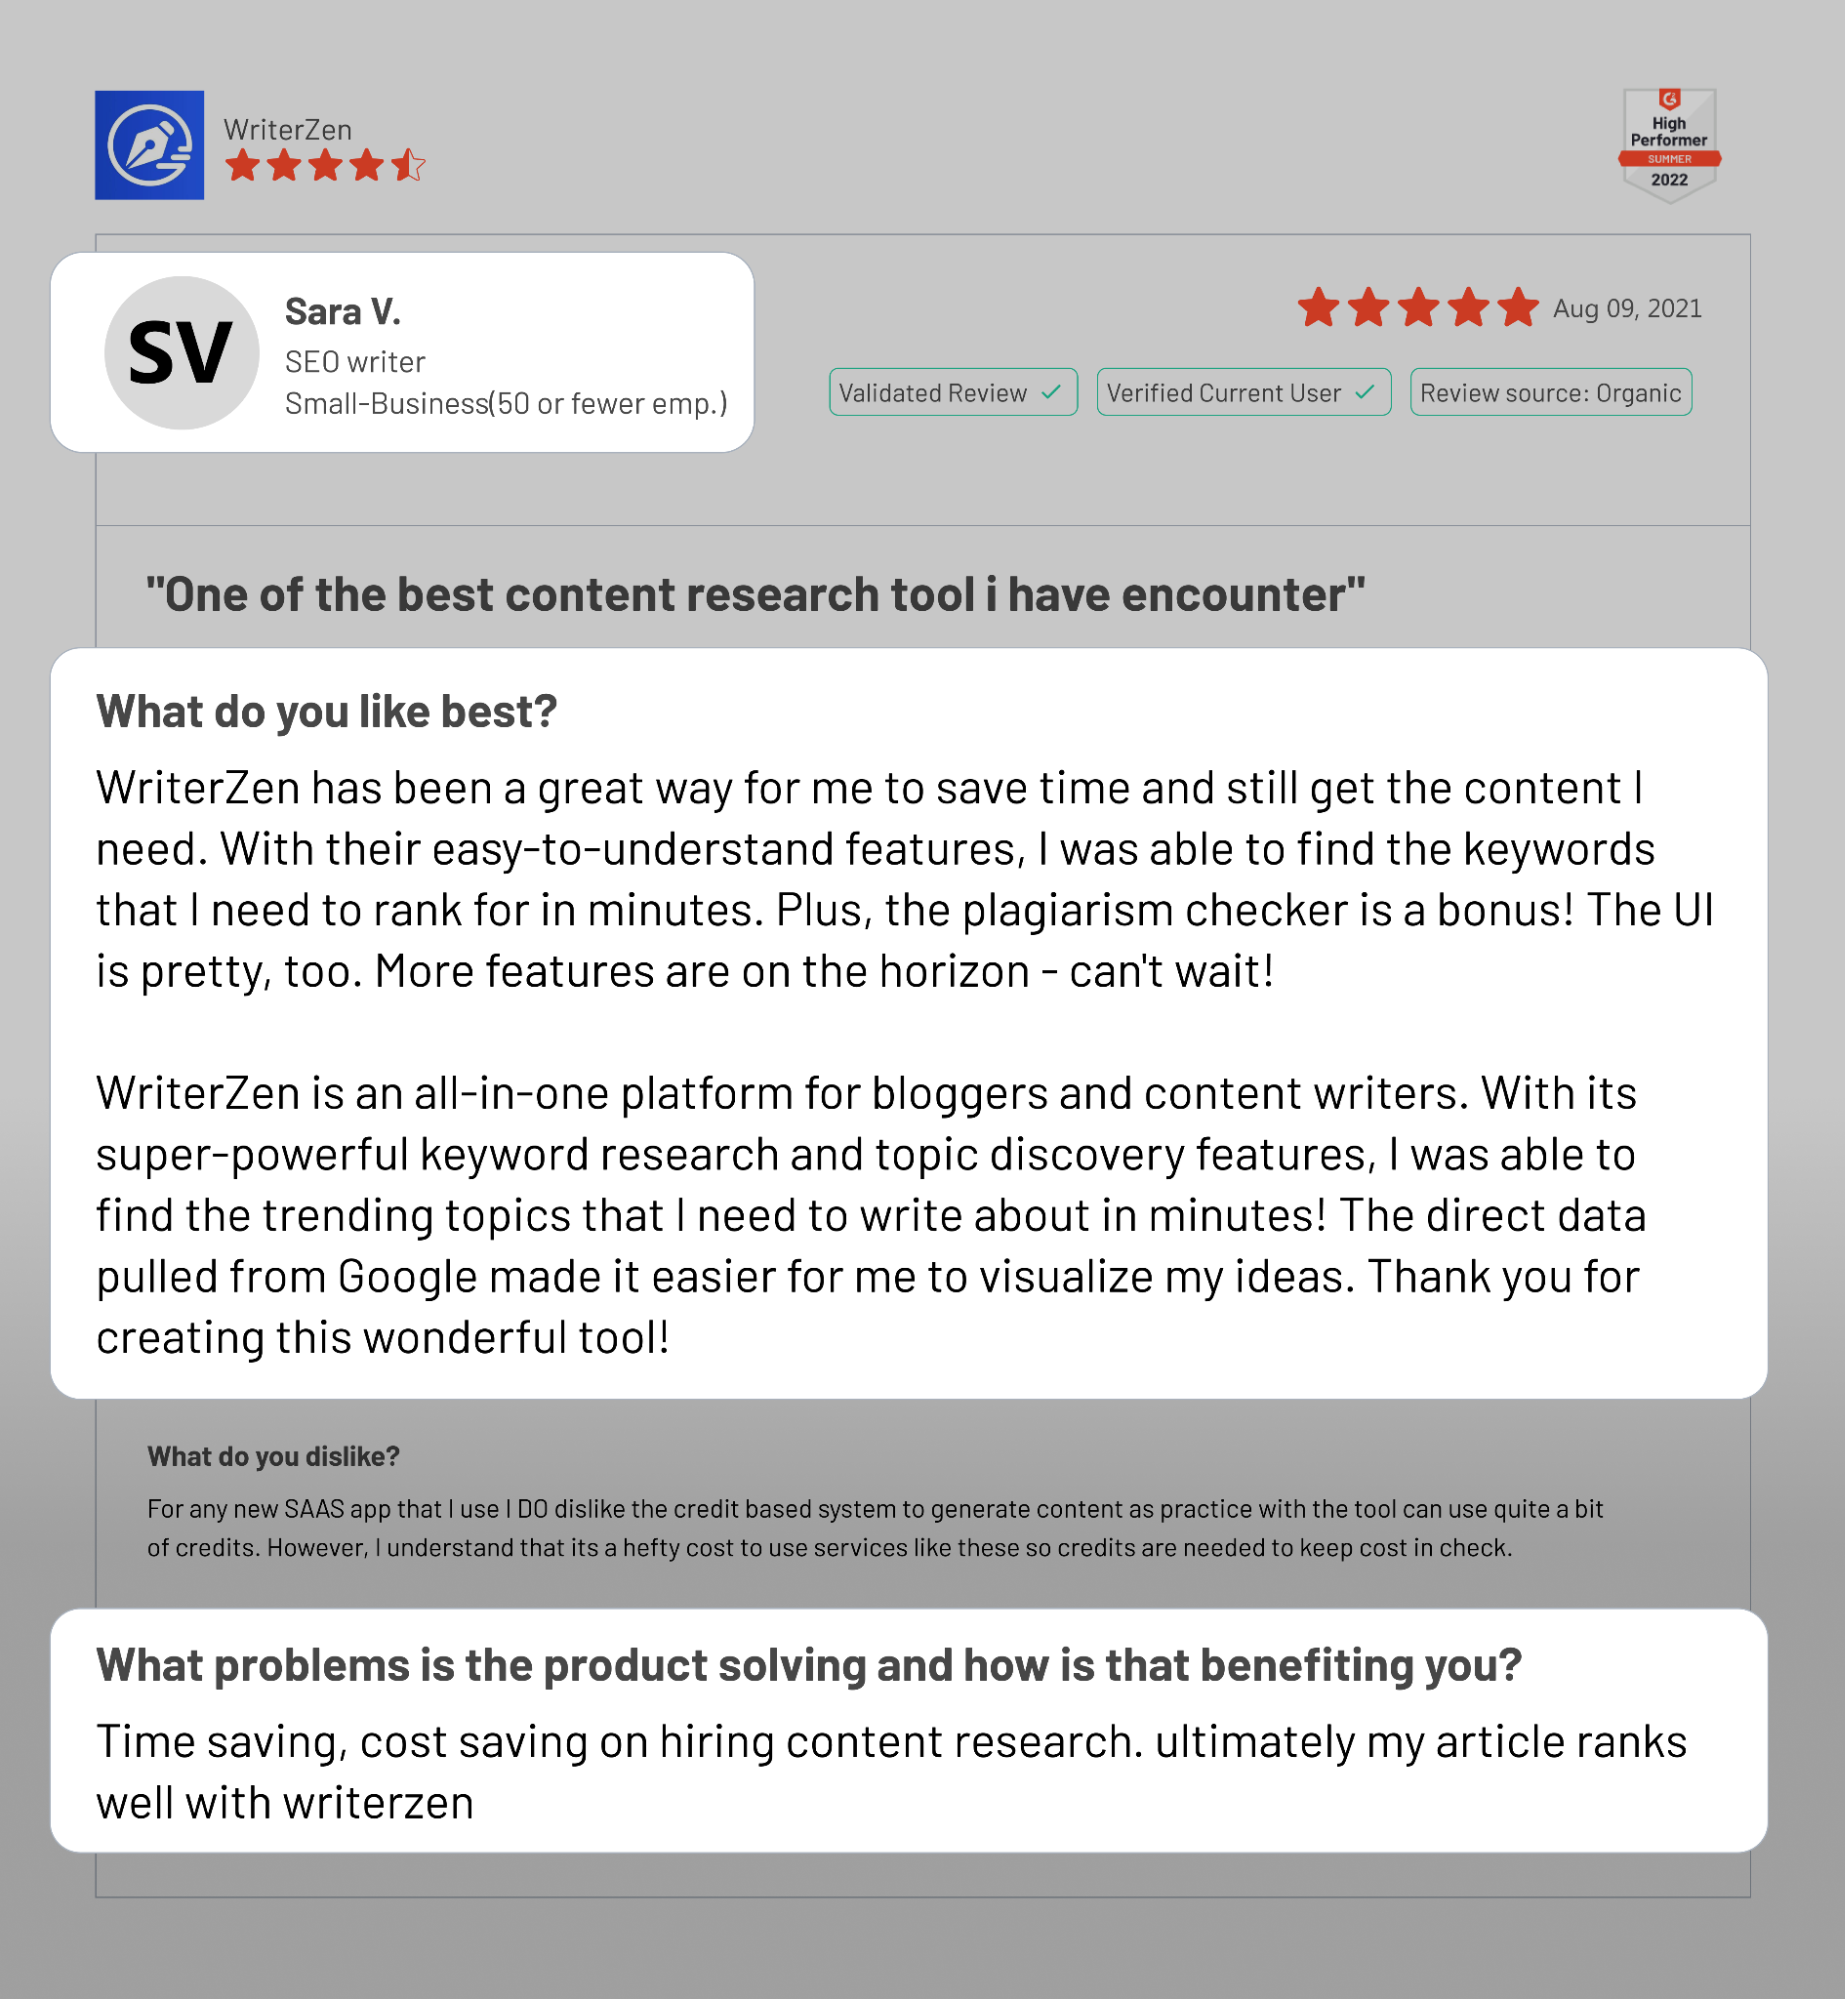 WriterZen is reviewed as best content research tool